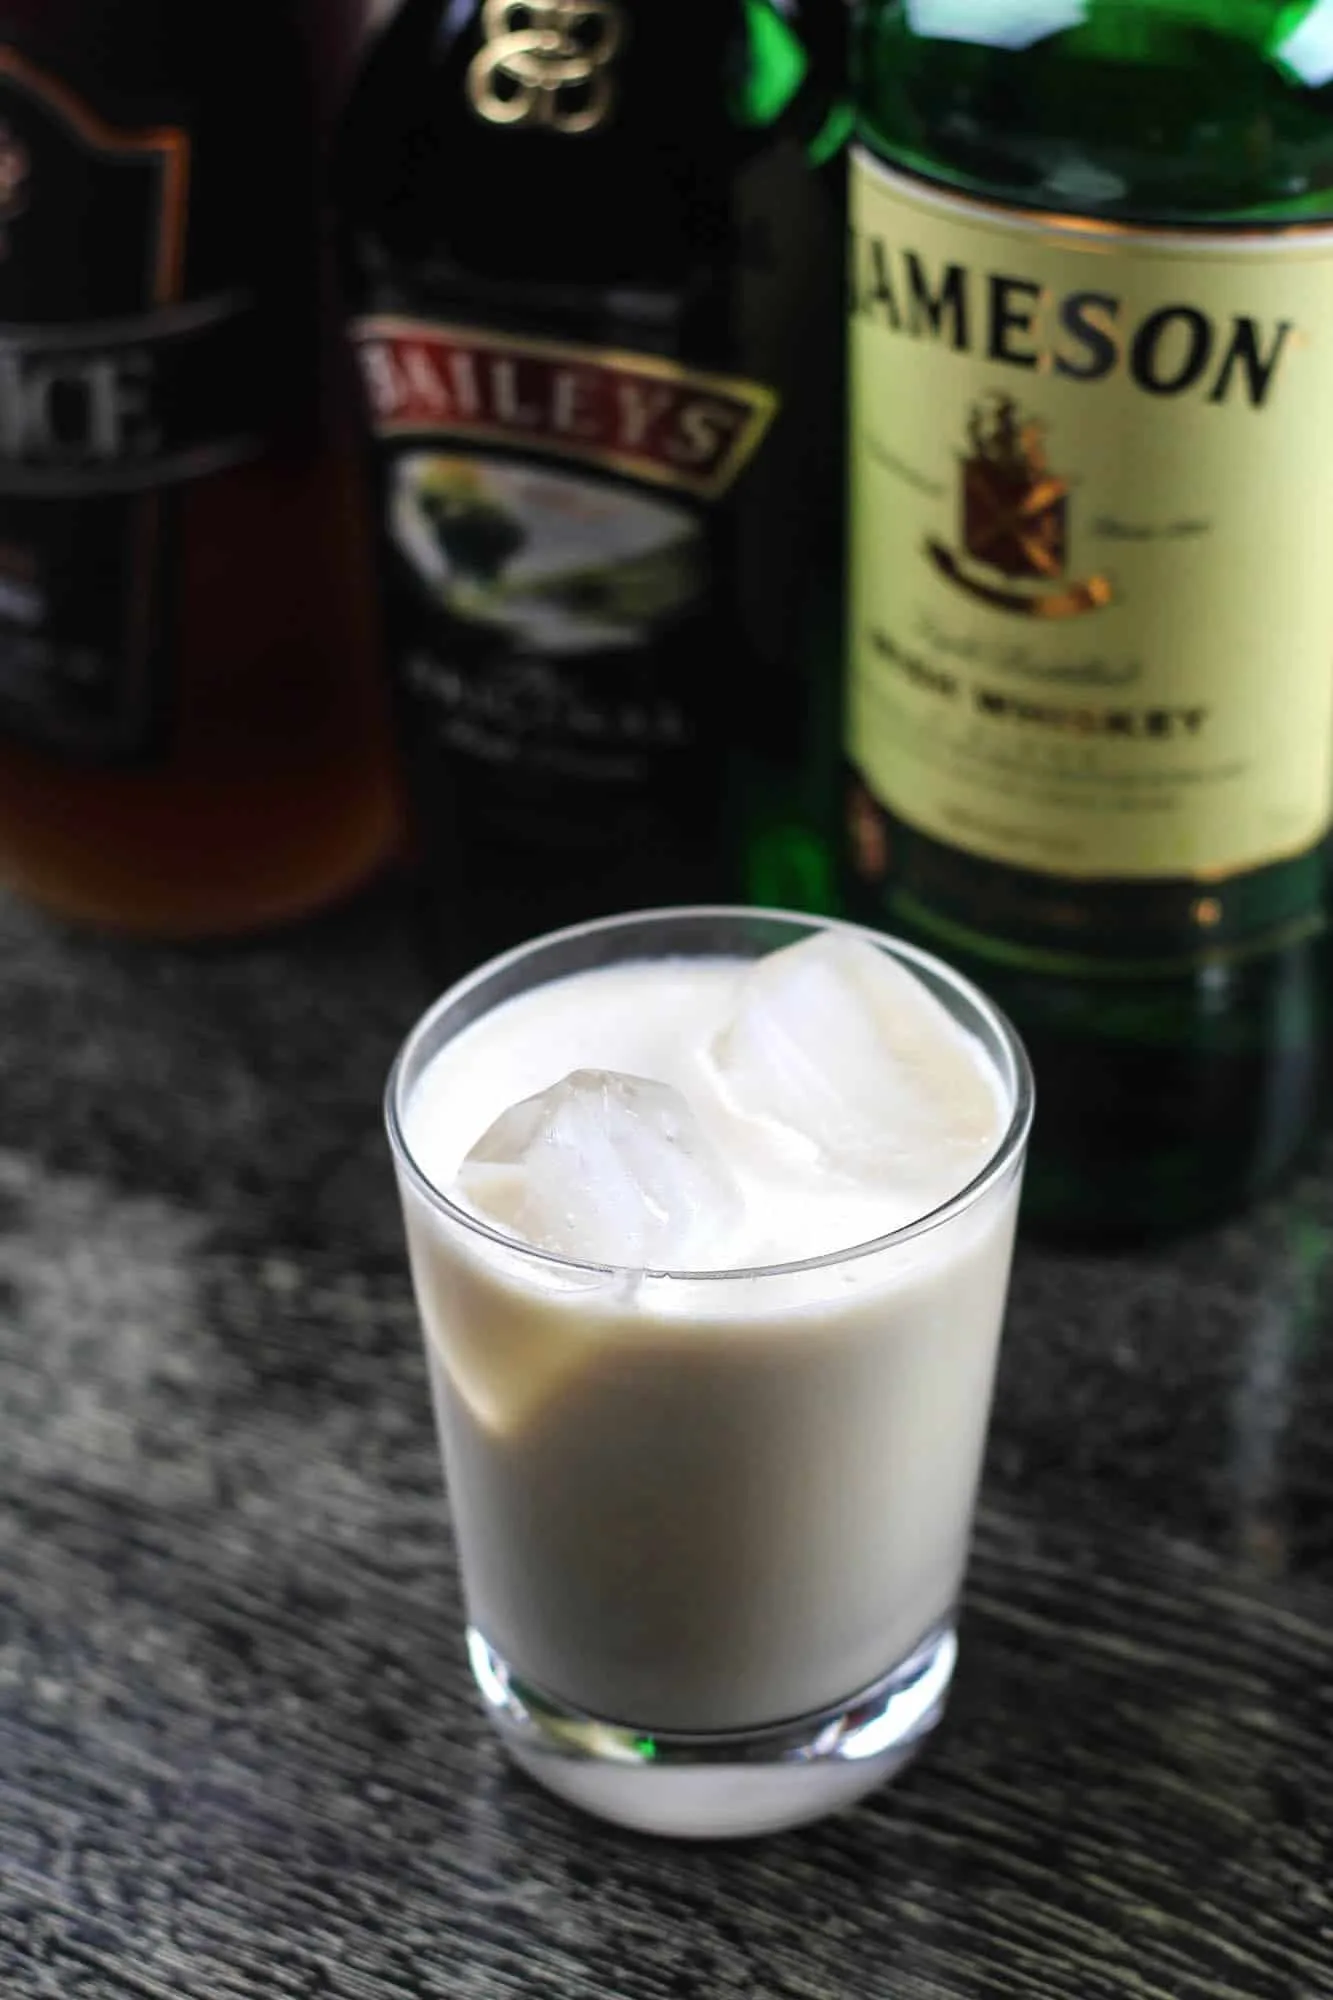 White leprechaun in a glass - white Russian cocktail with whiskey instead of vodka